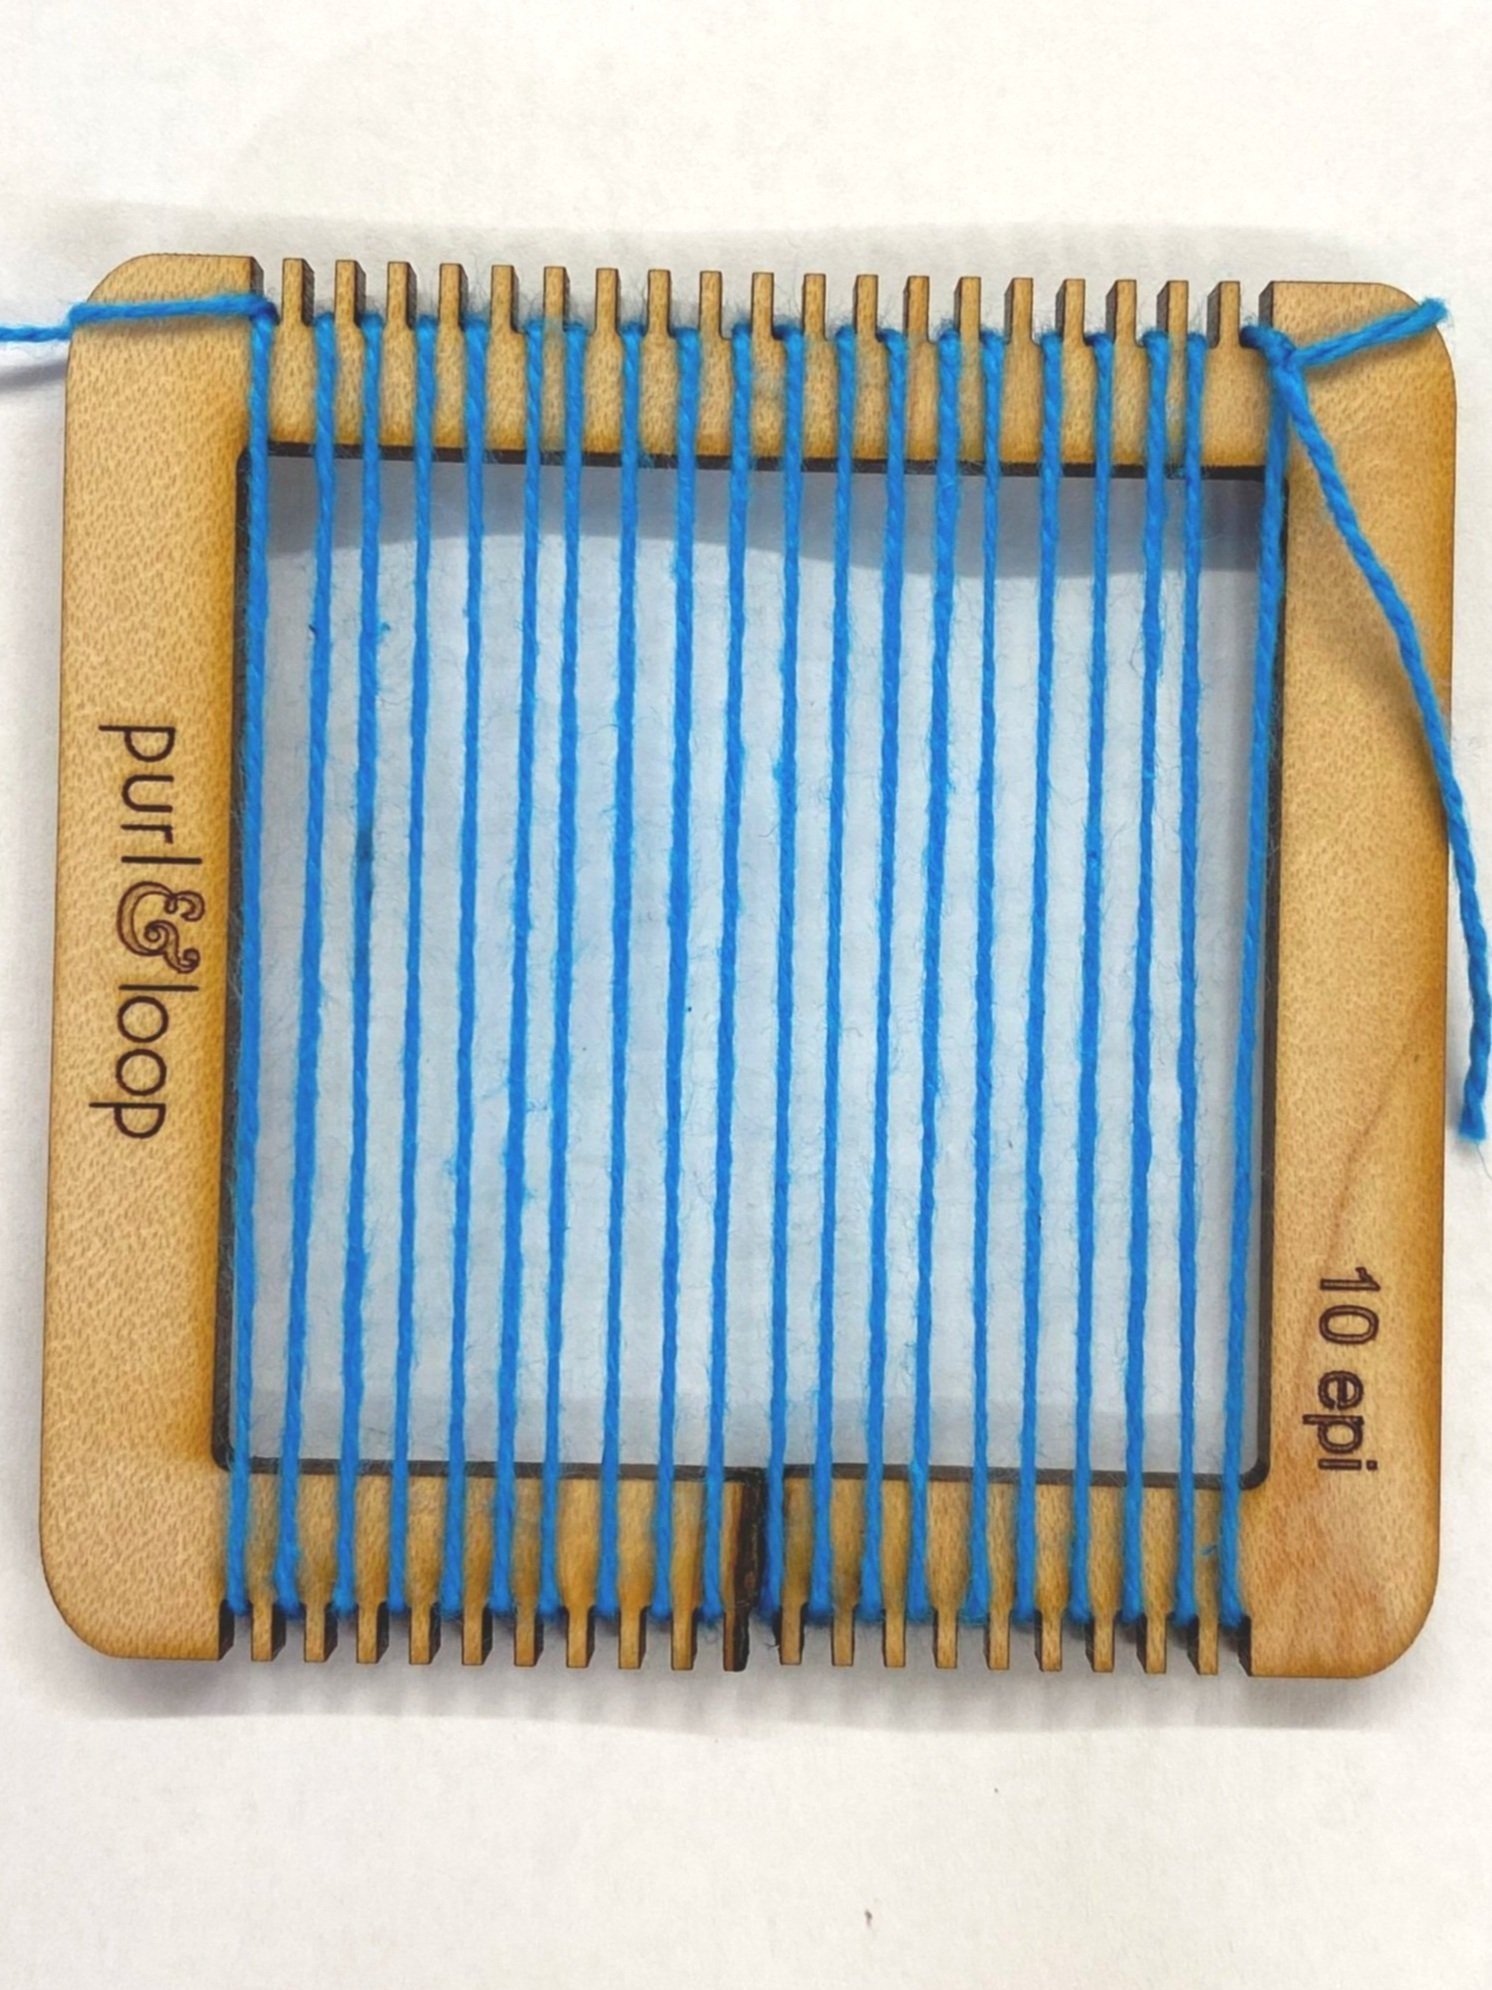 Weaving Combs From Purl and Loop